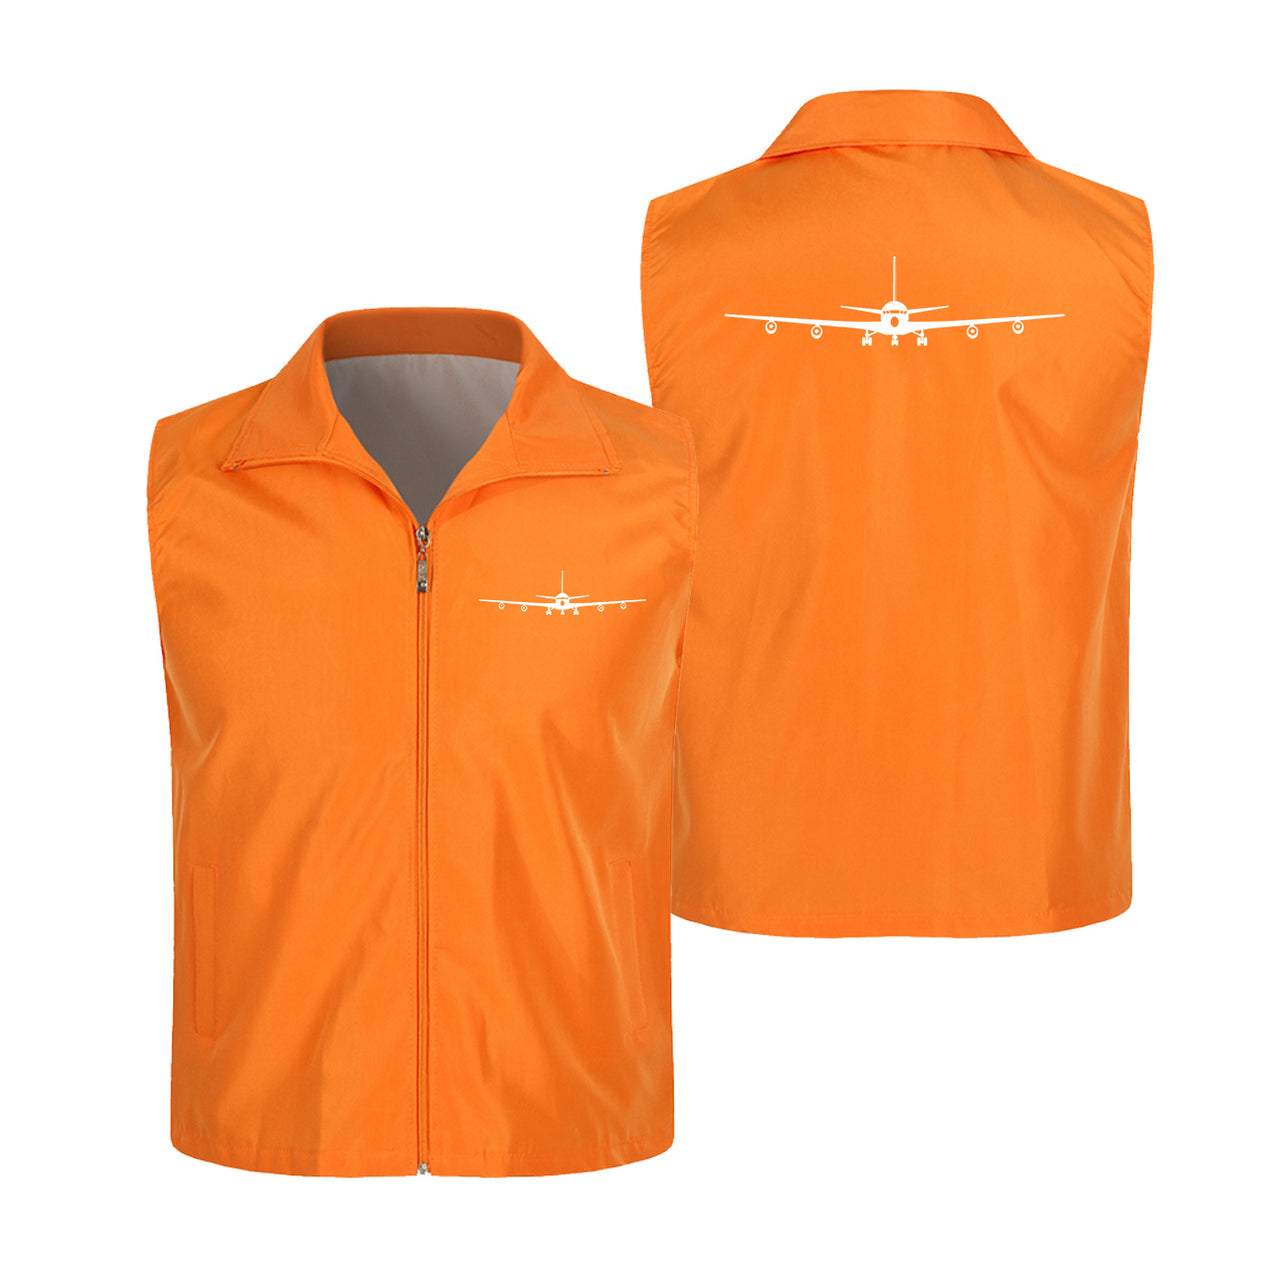 Boeing 707 Silhouette Designed Thin Style Vests